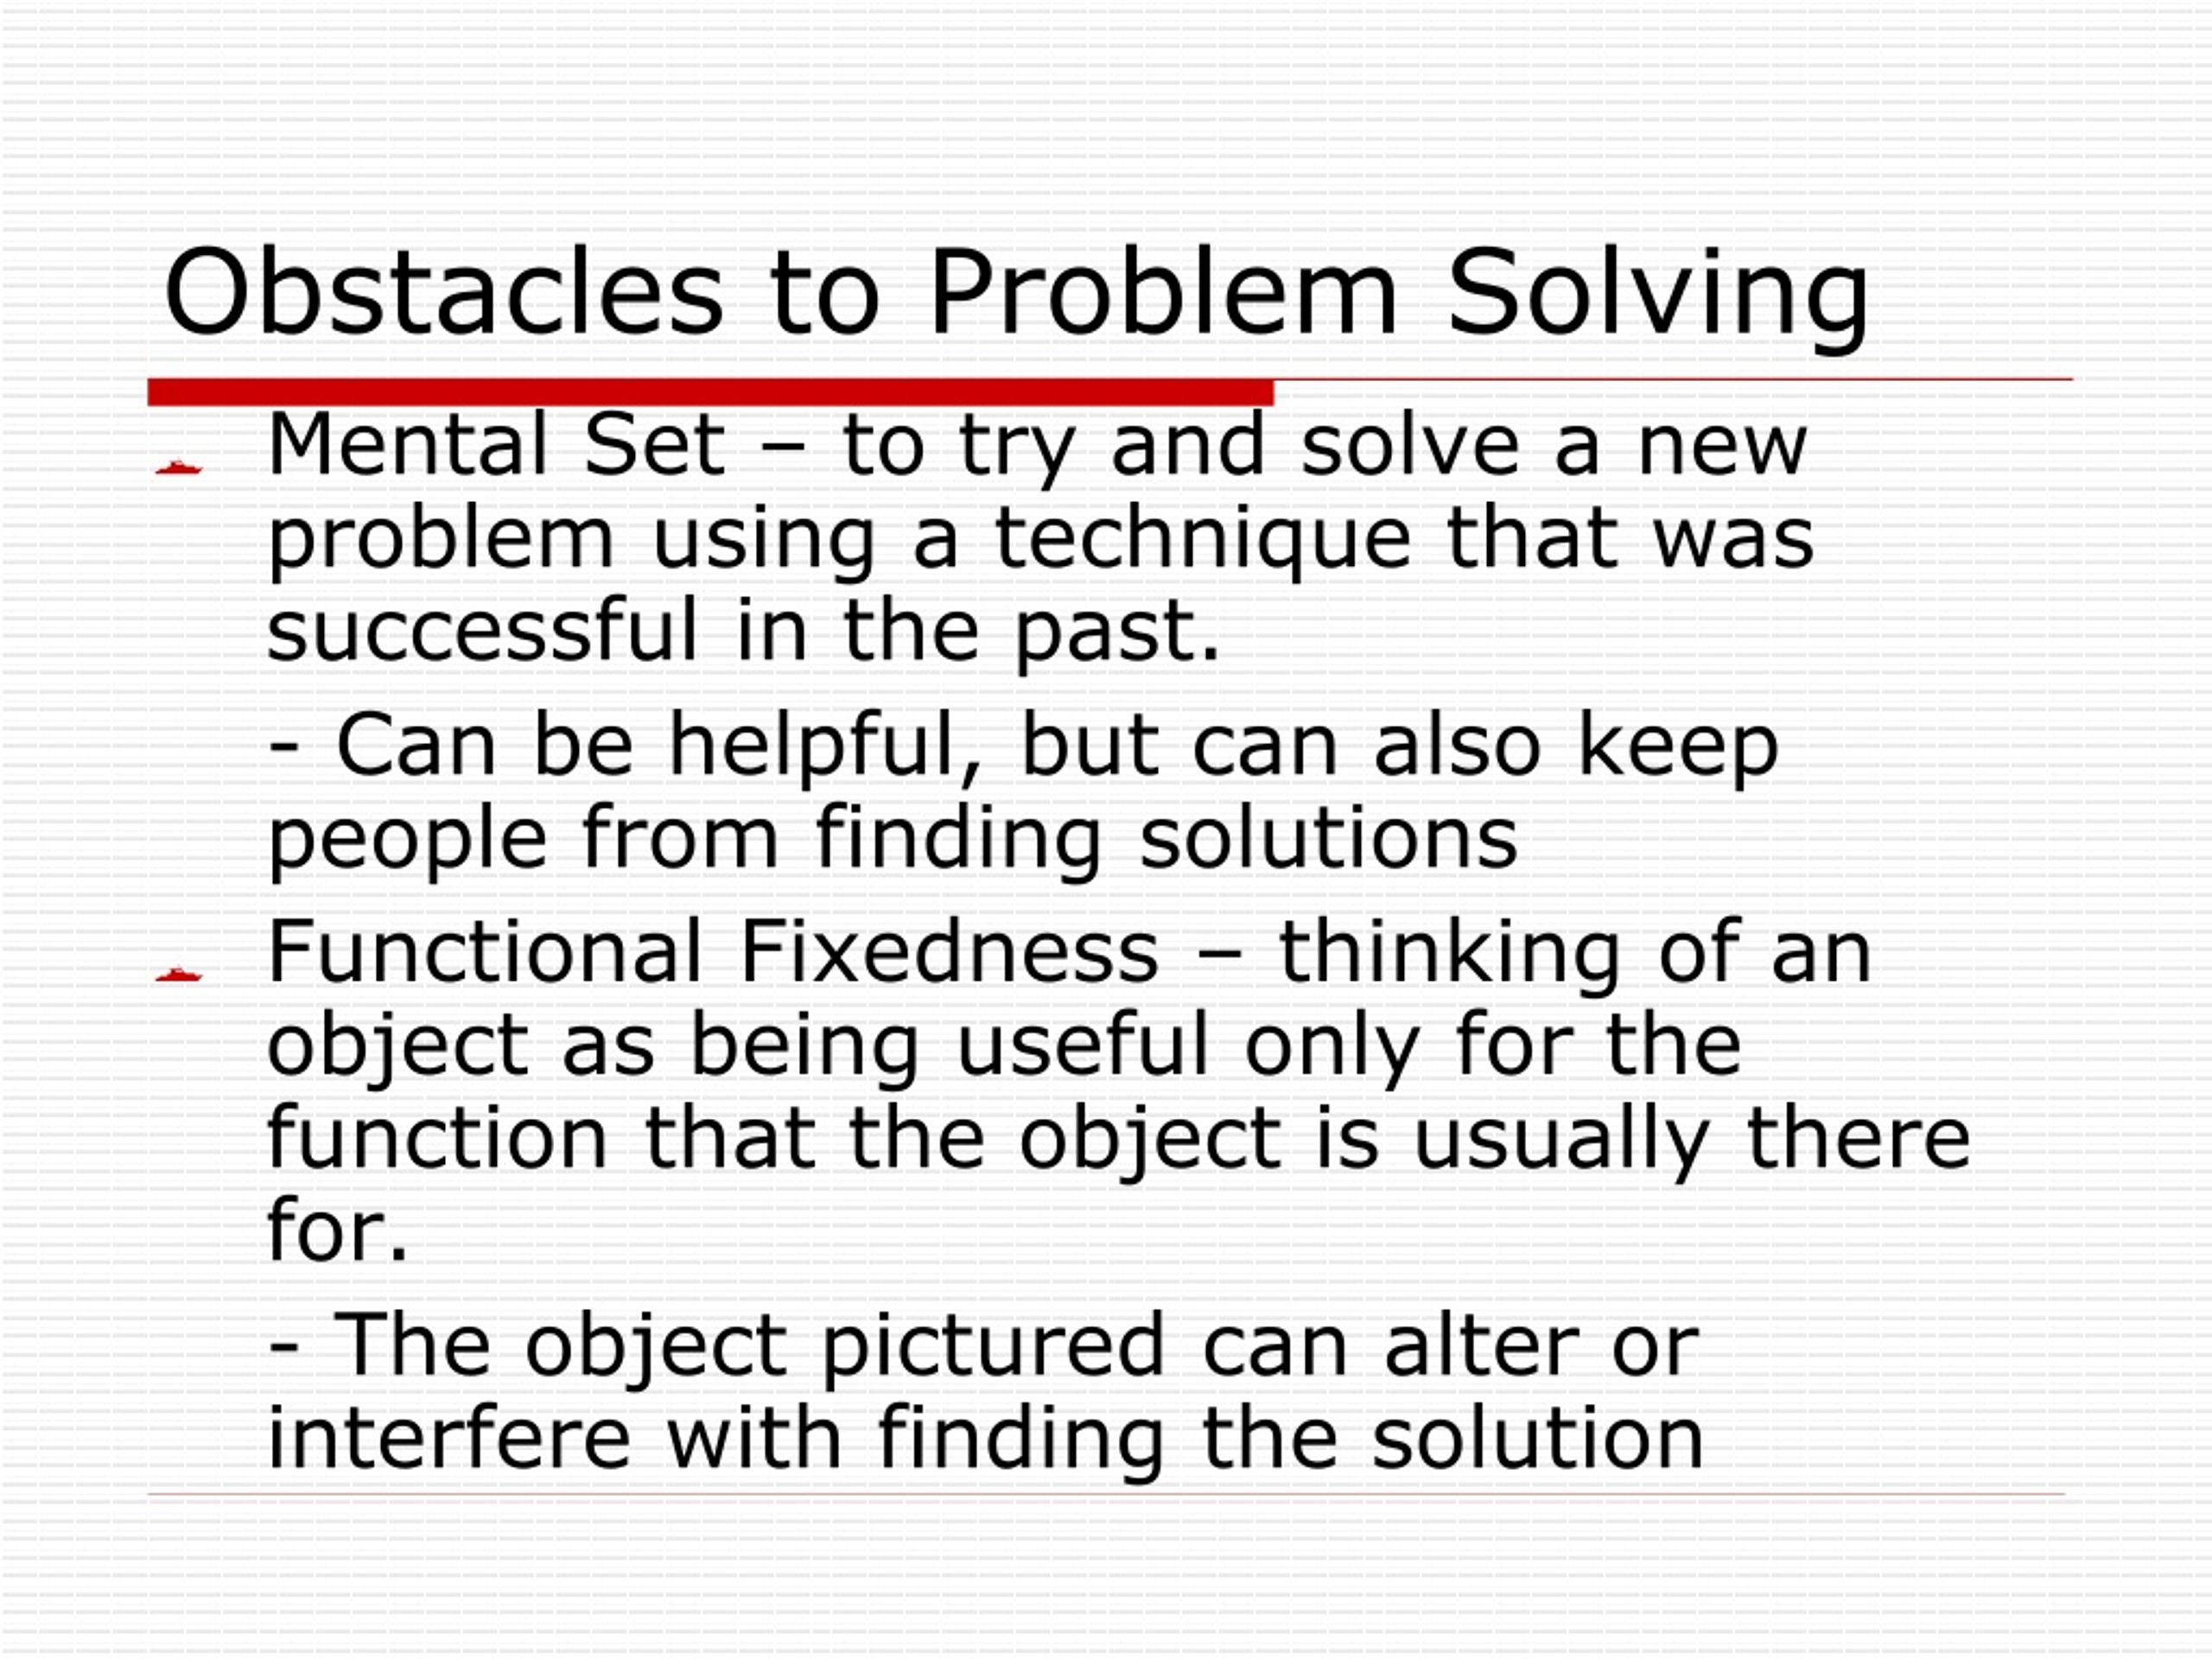 four major obstacles to problem solving